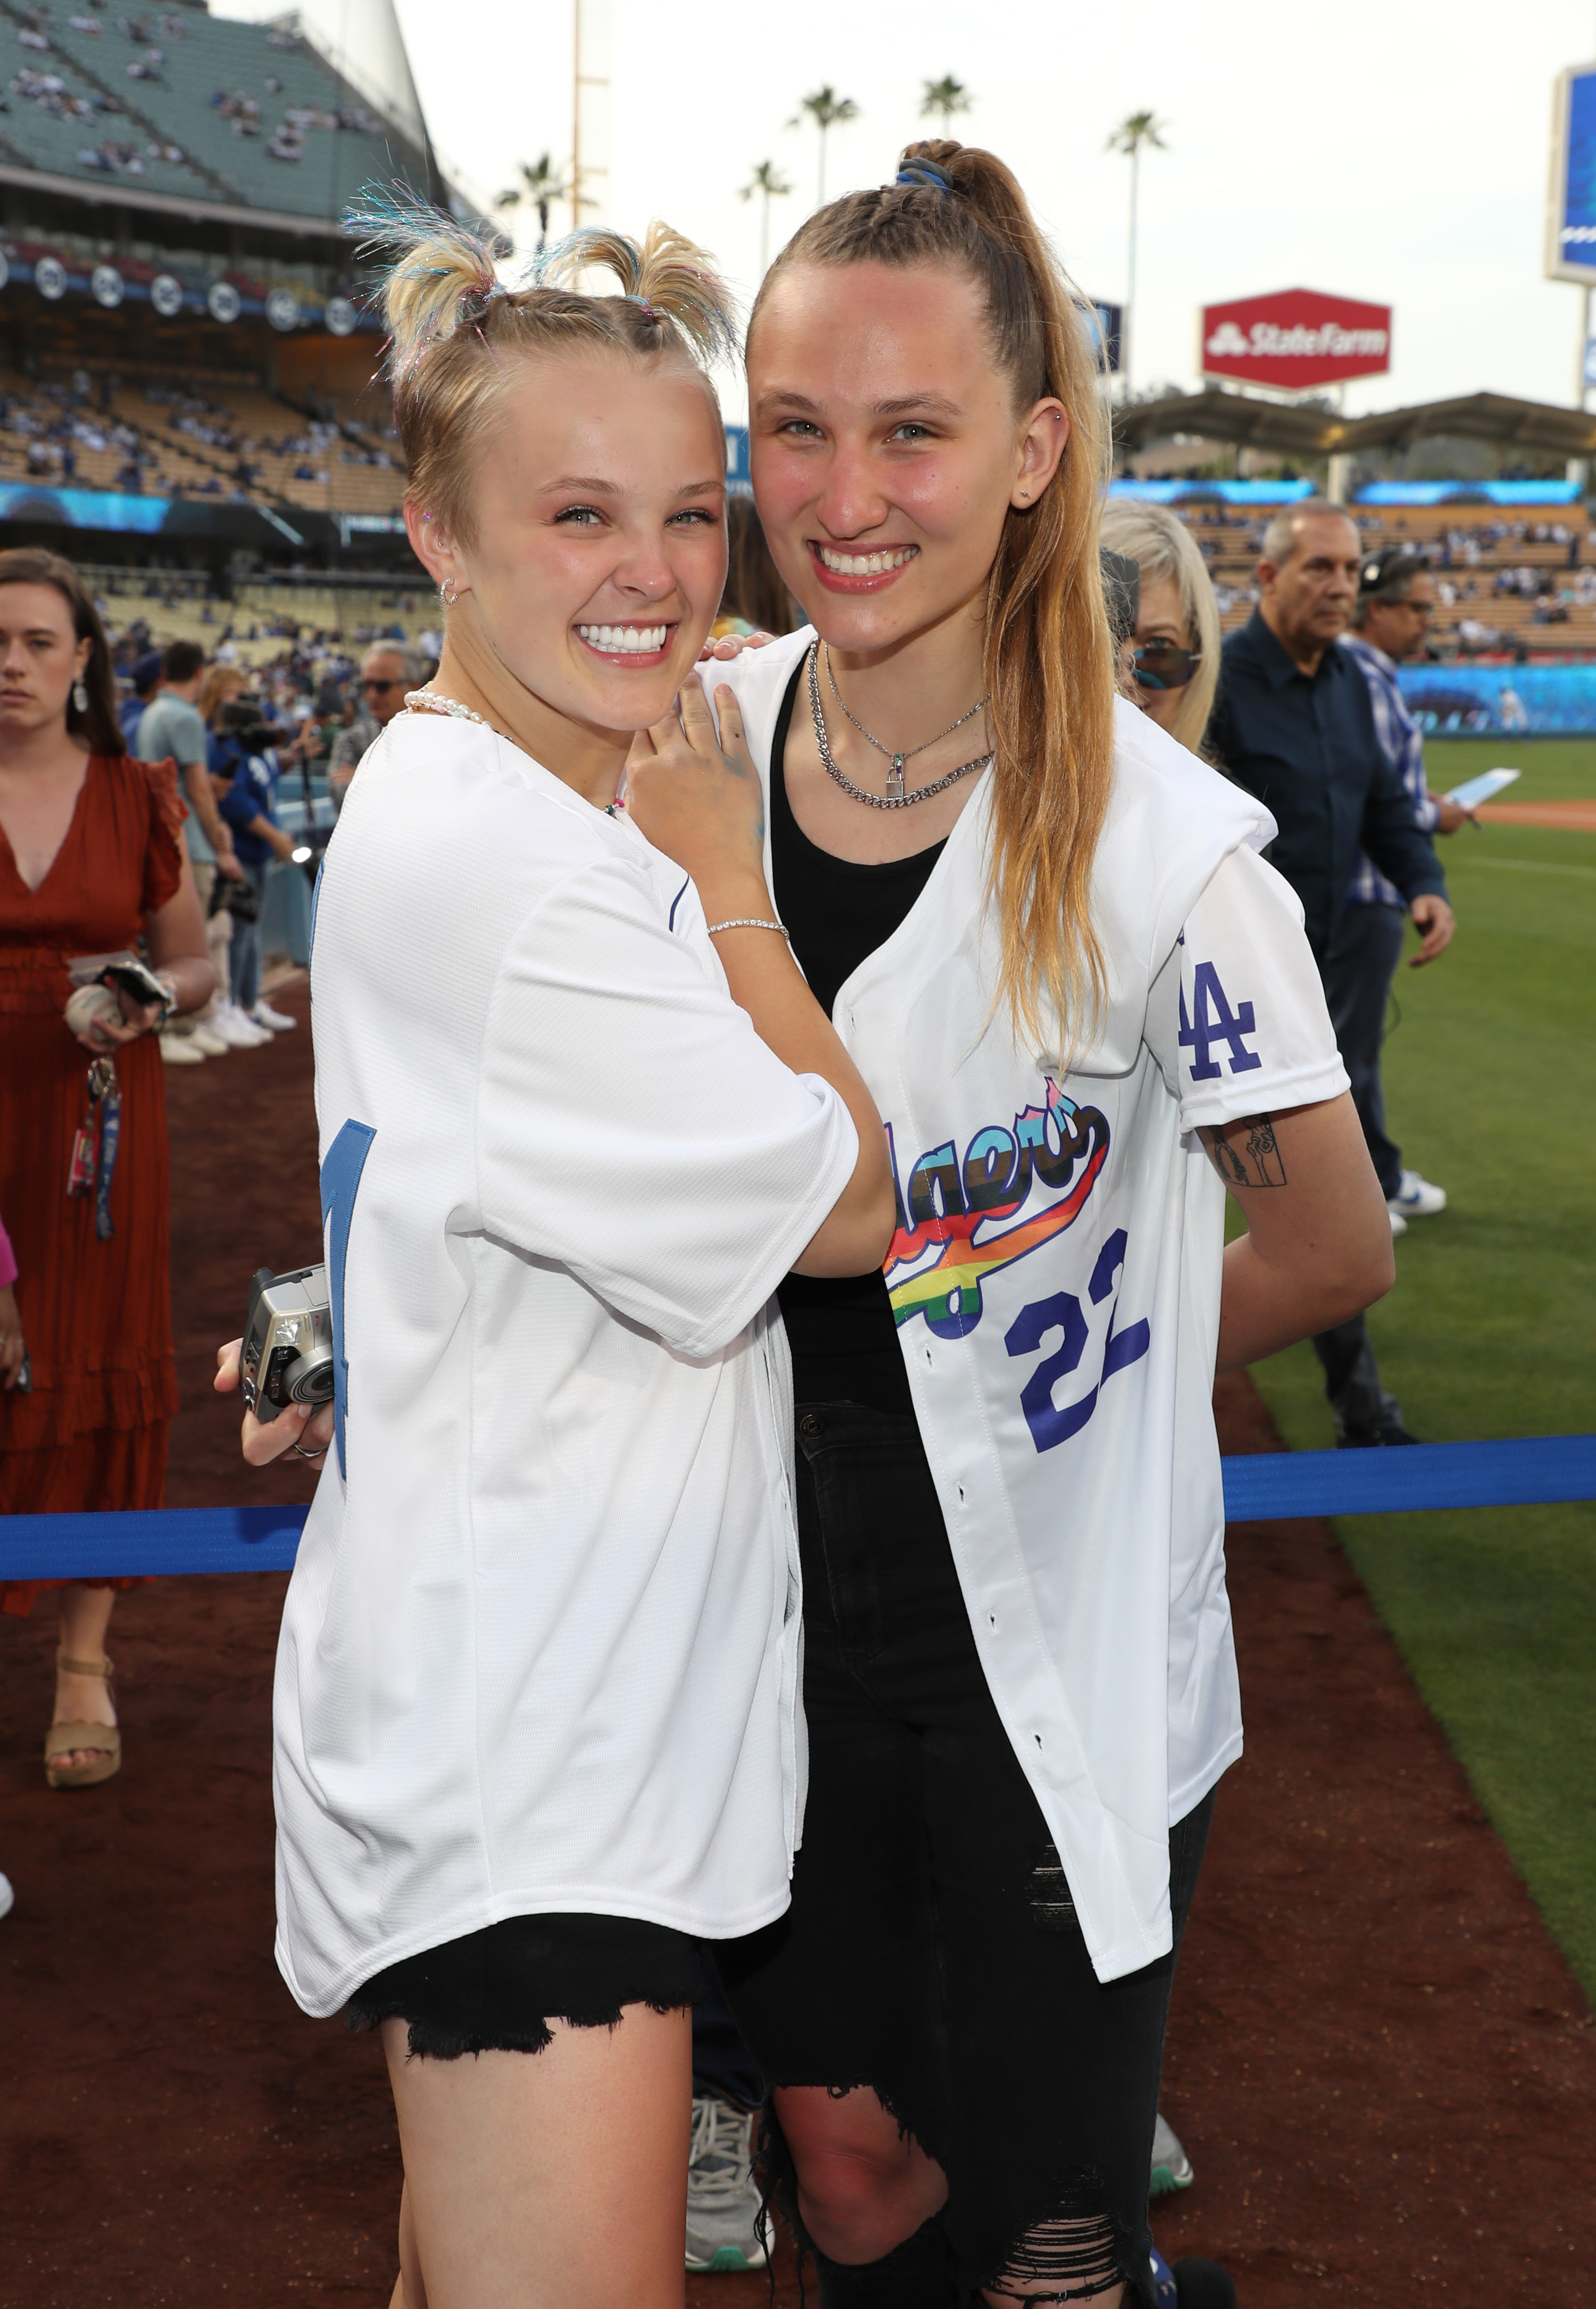 the two posing at a dodgers game